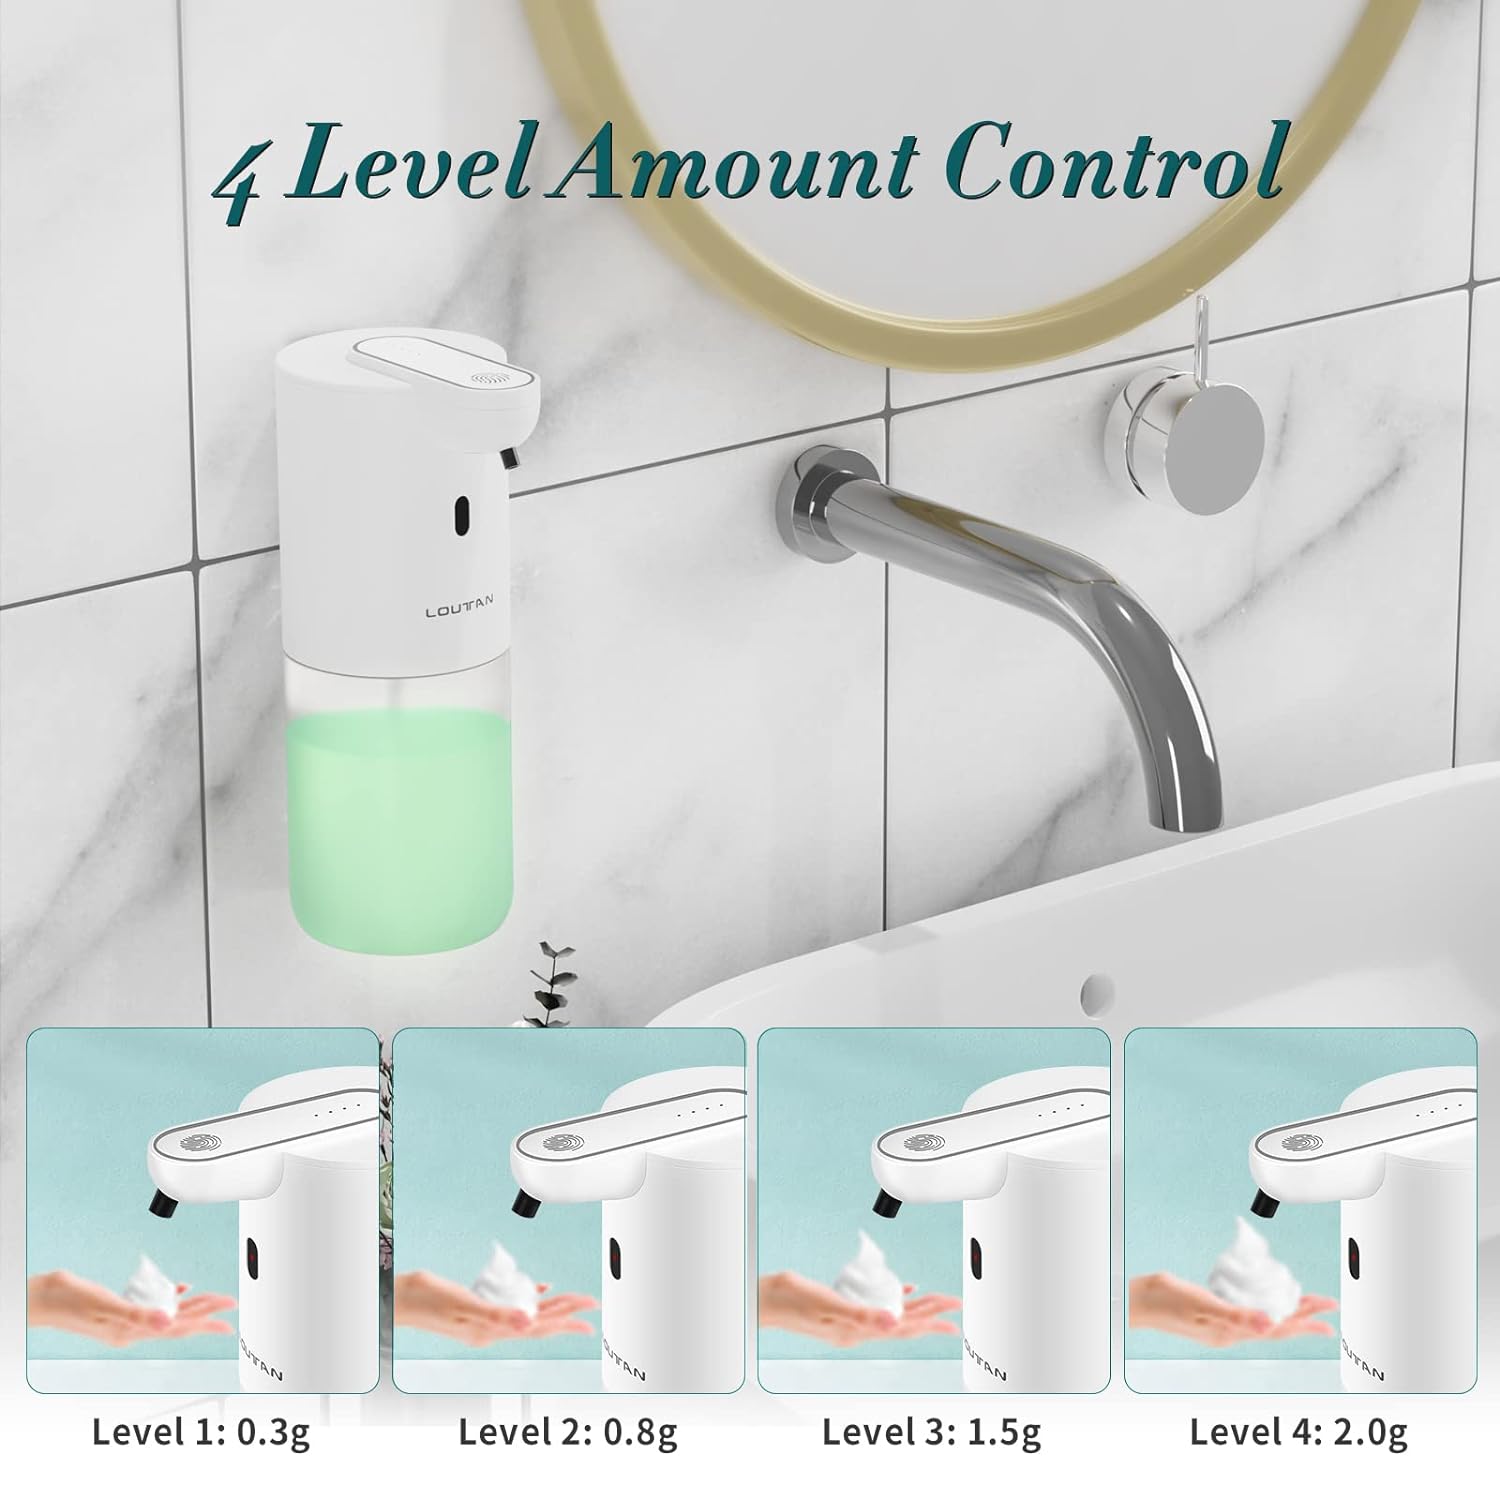 Automatic Soap Dispenser, Touchless Foaming Soap Dispenser Hands Free Soap Dispenser with 4 Levels Adjustable, Rechargeable Foam Soap Dispenser for Kitchen Bathroom, 400 ml, IPX5 Waterproof